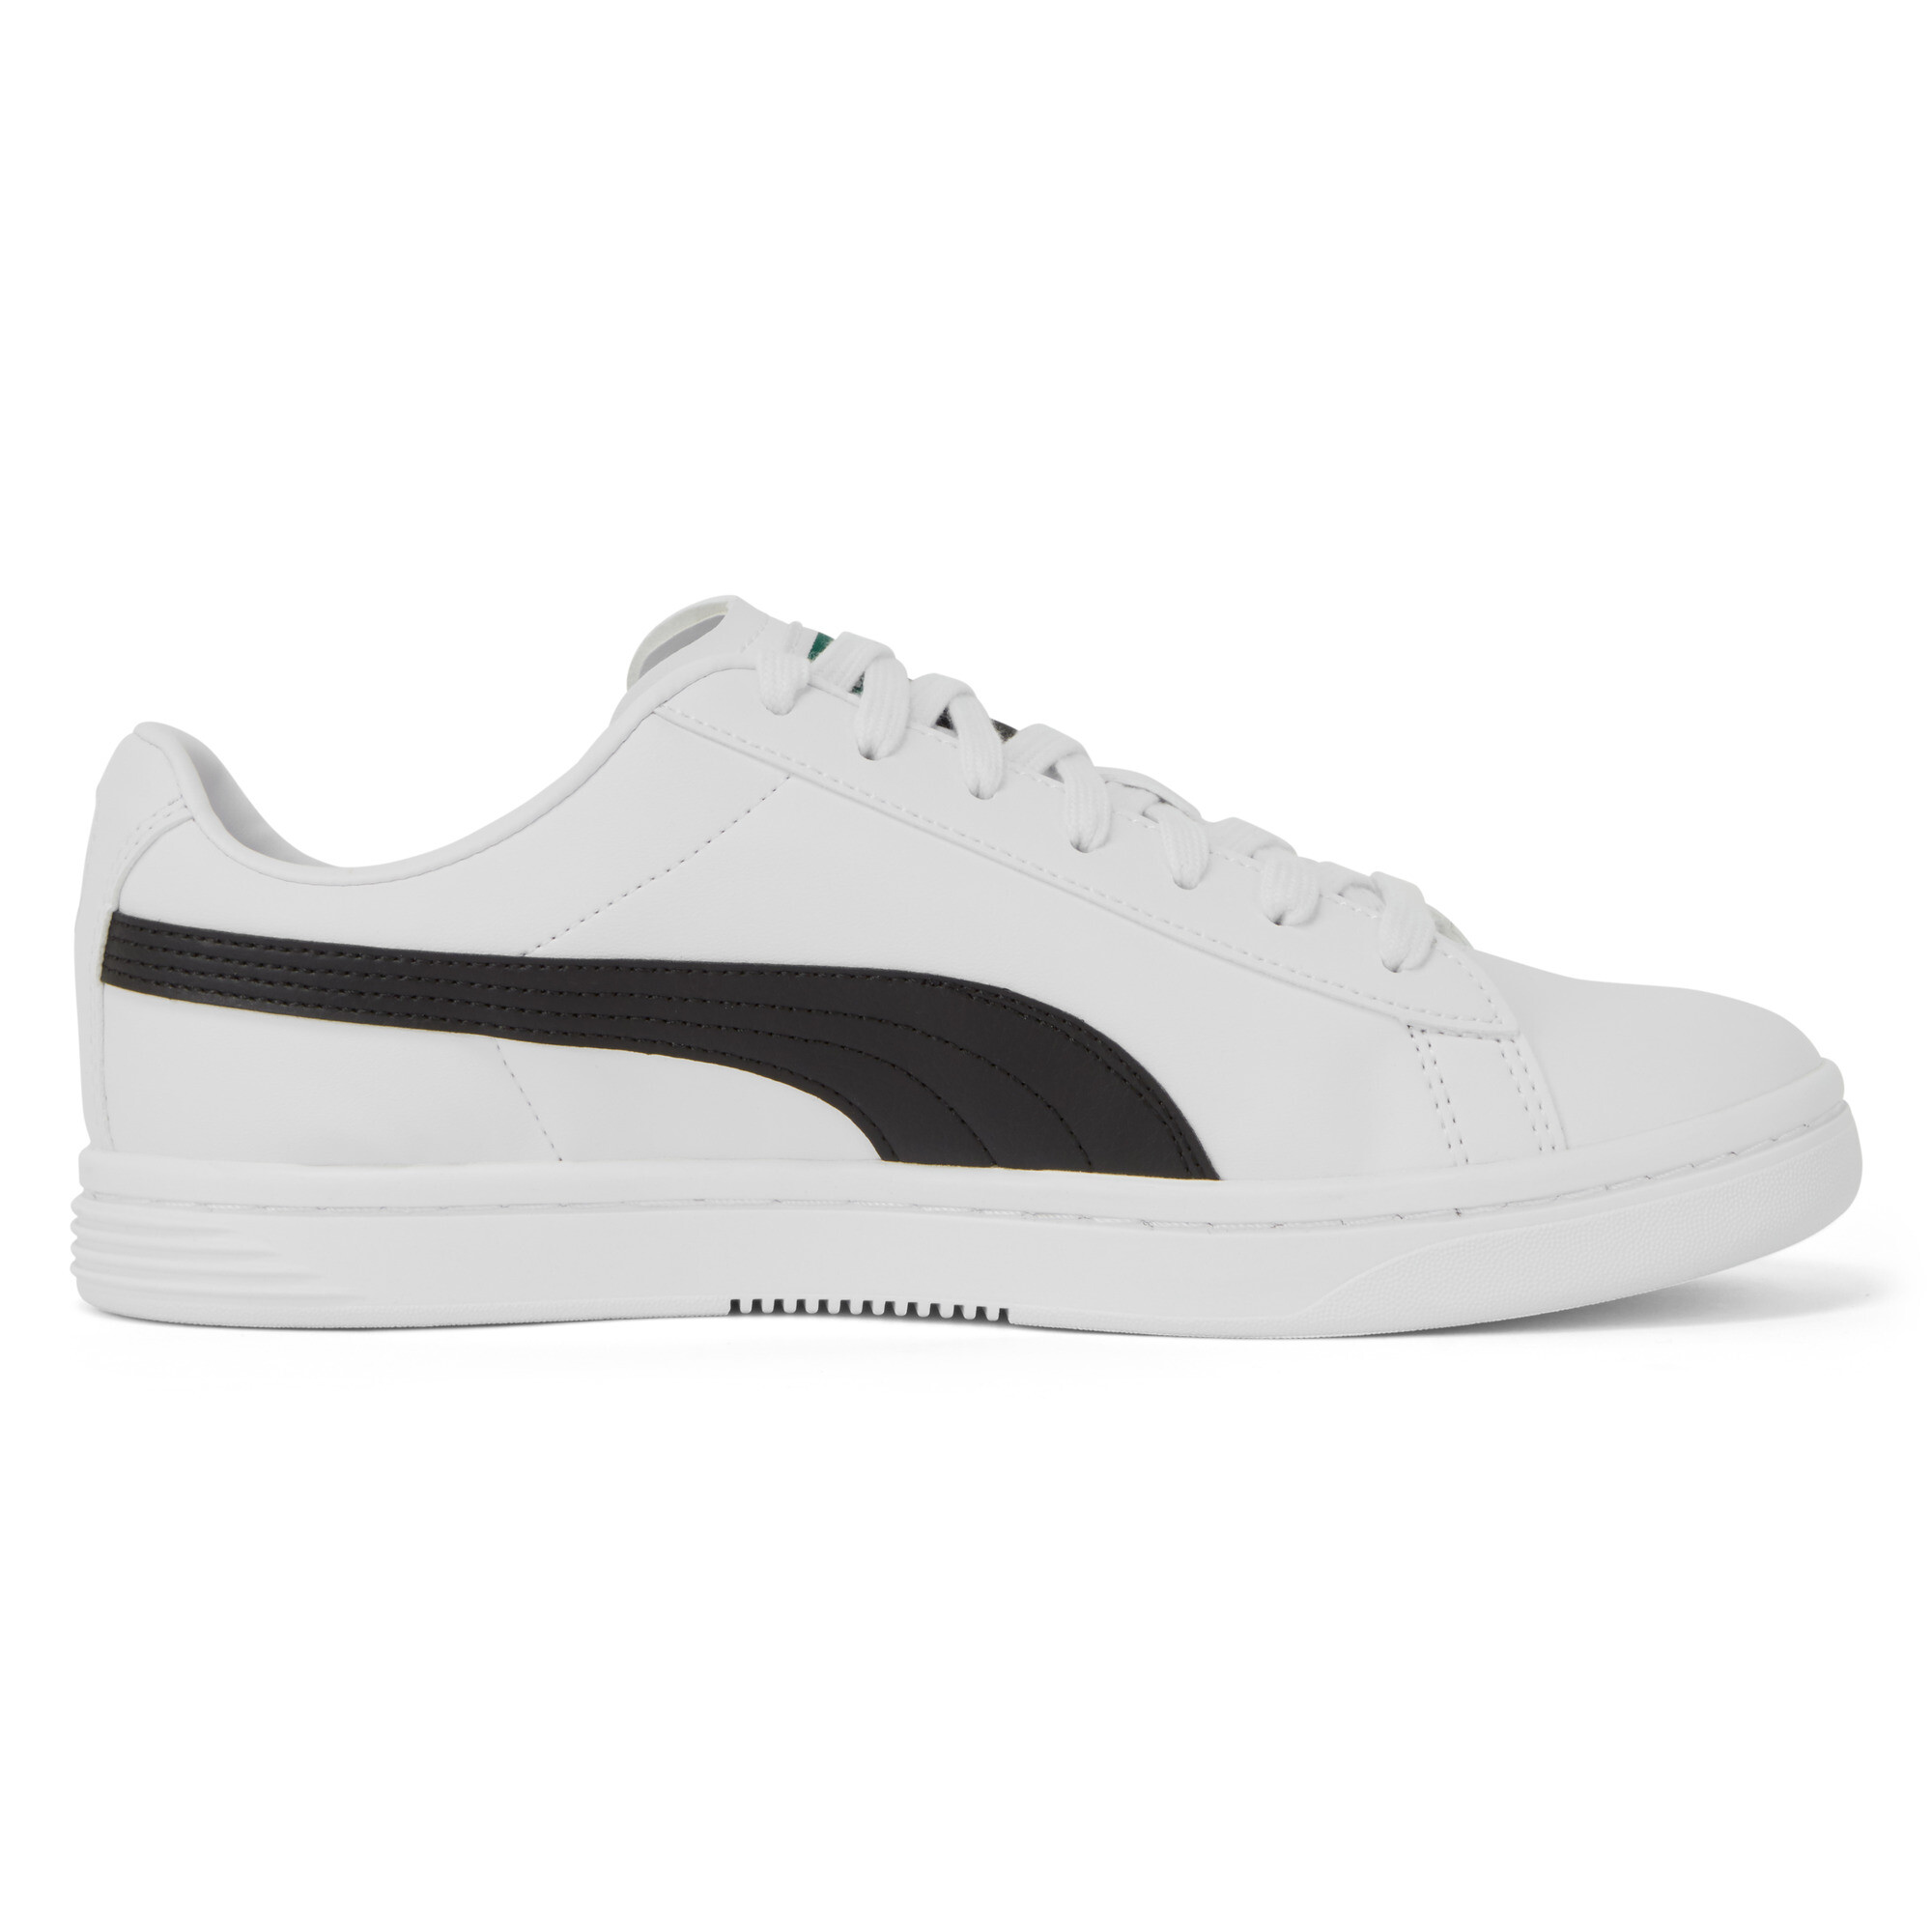 PUMA Court Star SL Trainers Sport Shoes Lace Up Low Top Unisex | eBay